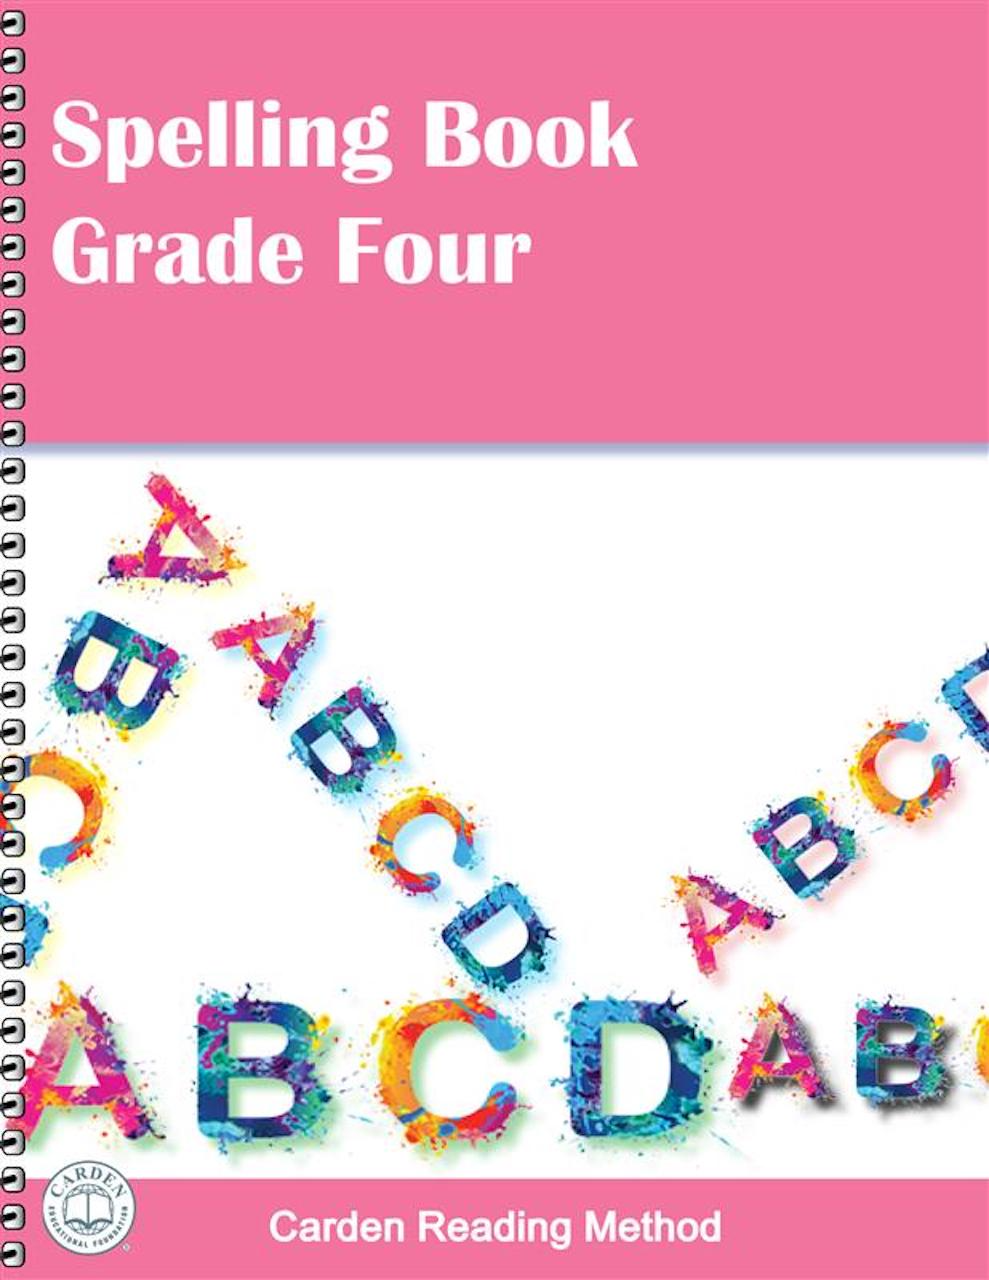 Book:　The　Spelling　Grade　Foundation　Carden　Educational